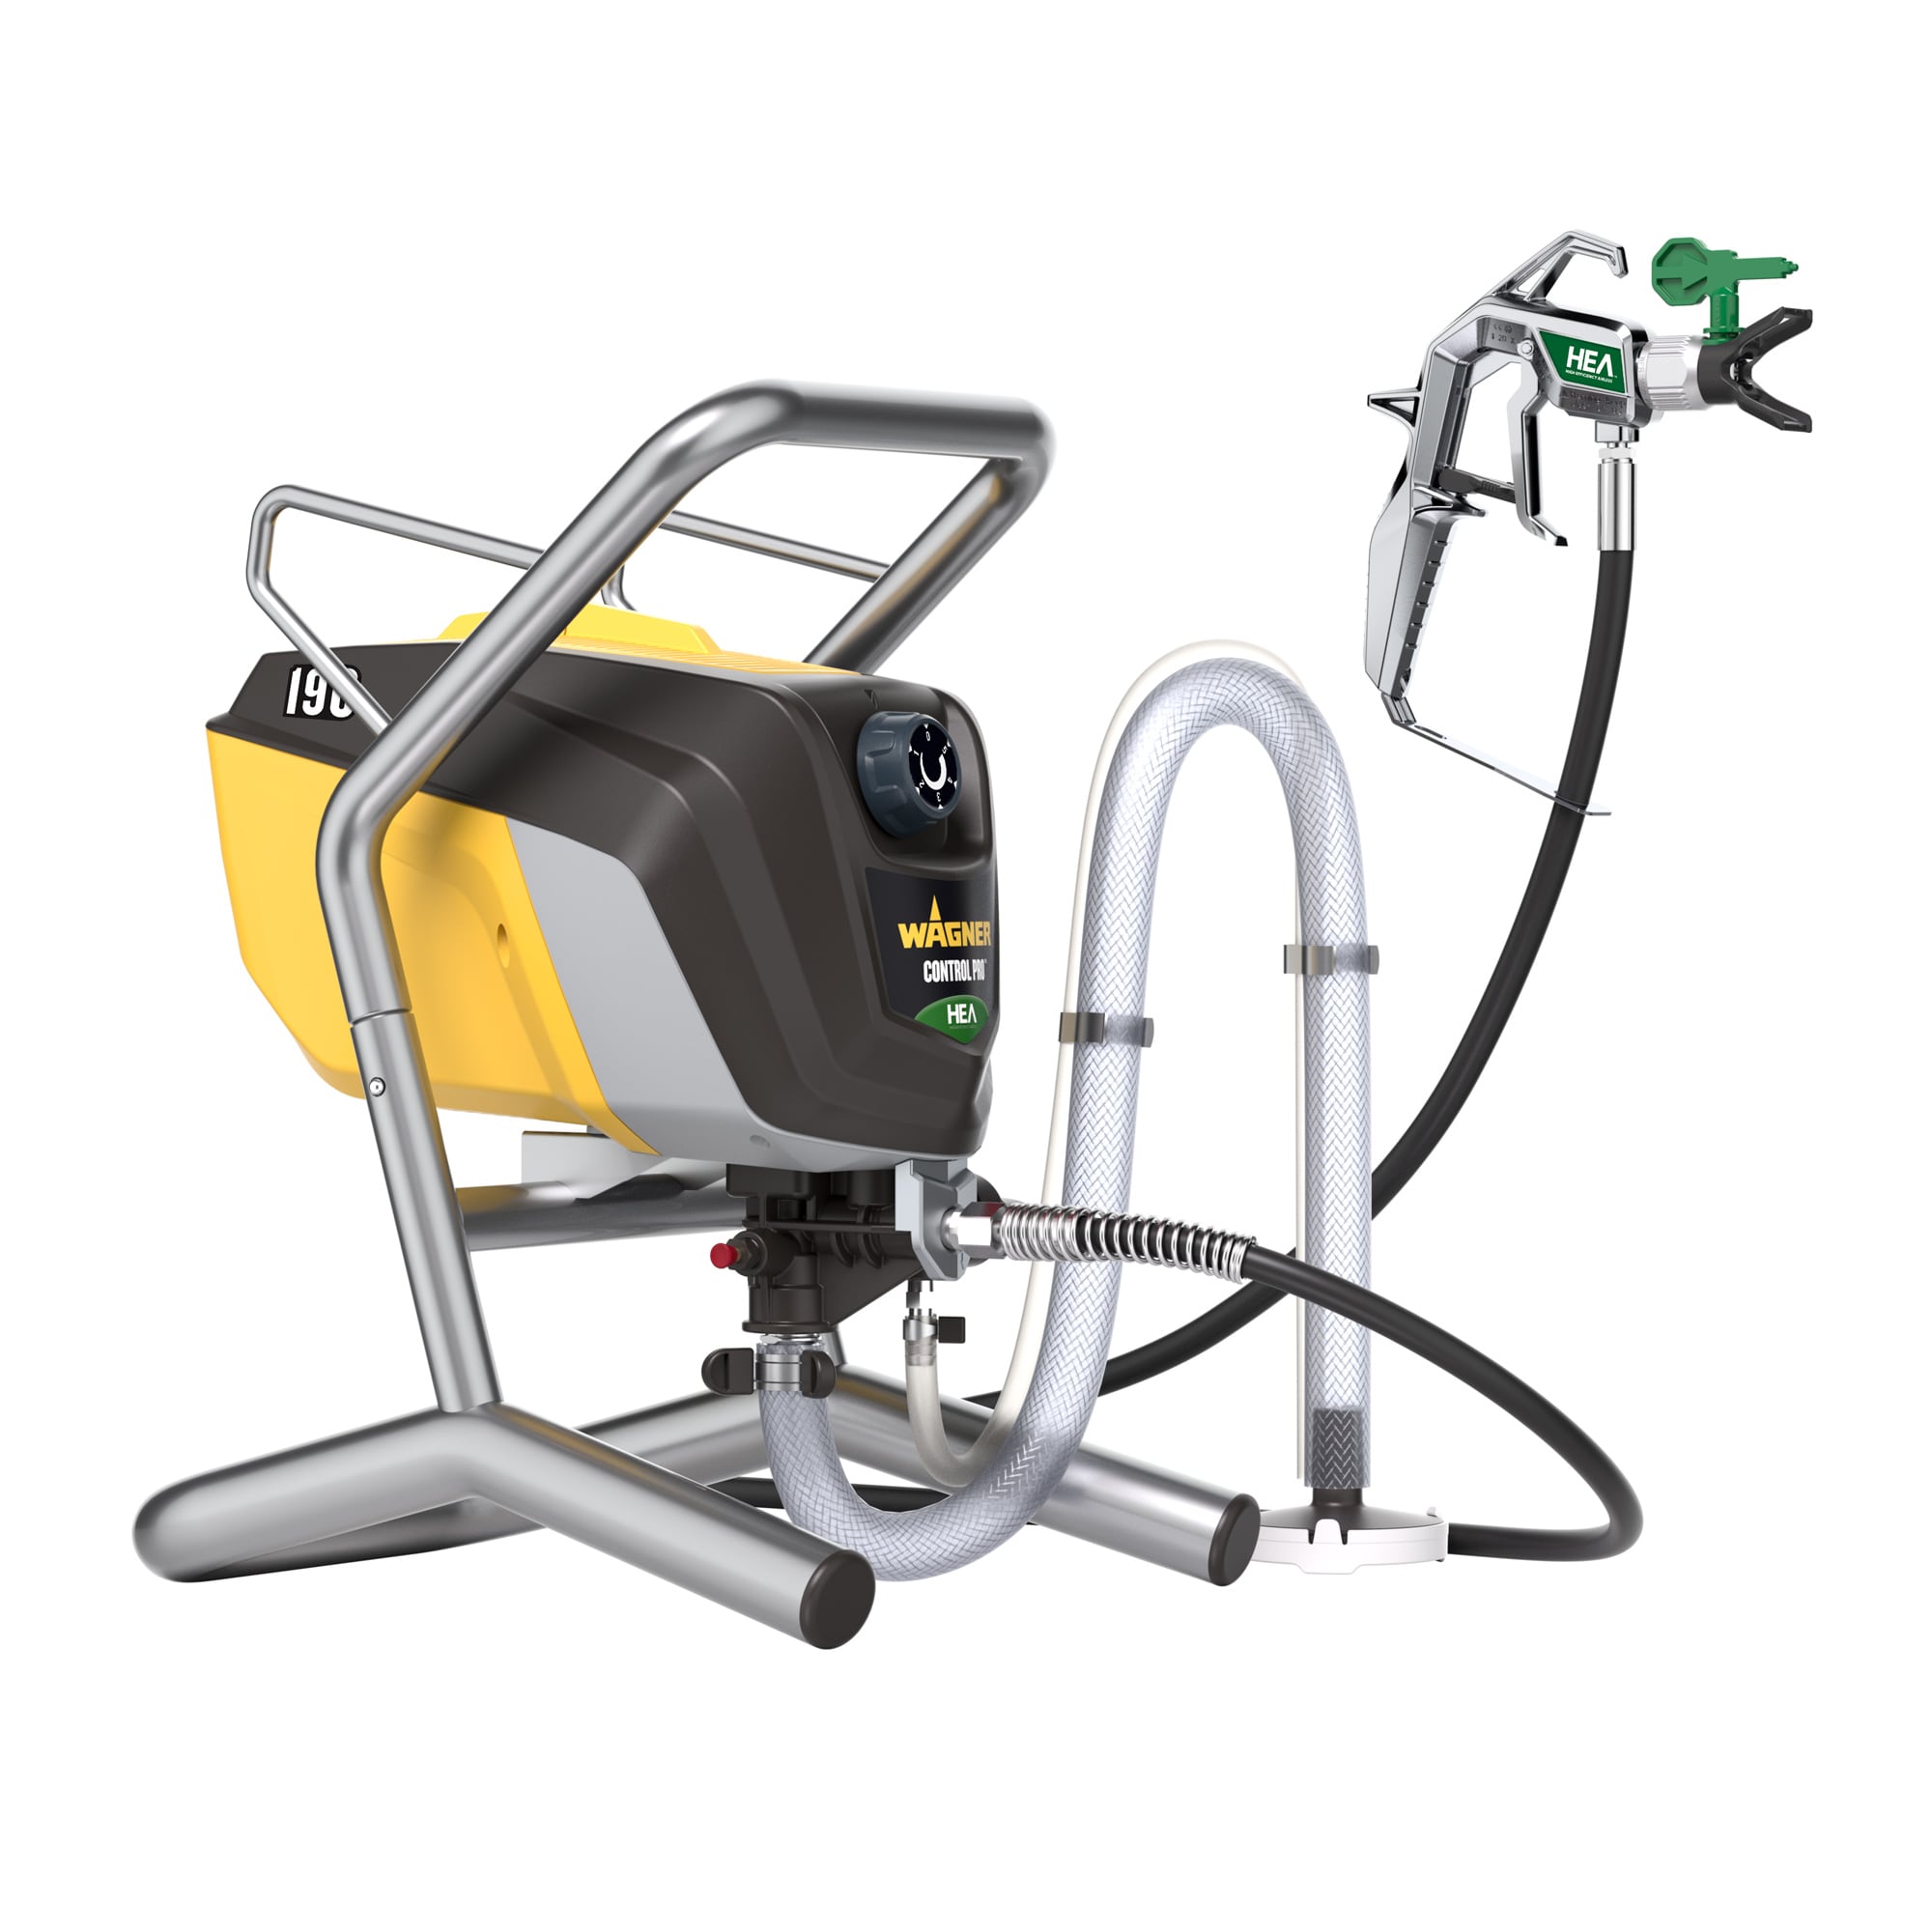 WAGNER Airless Sprayer Paint Sprayers for sale